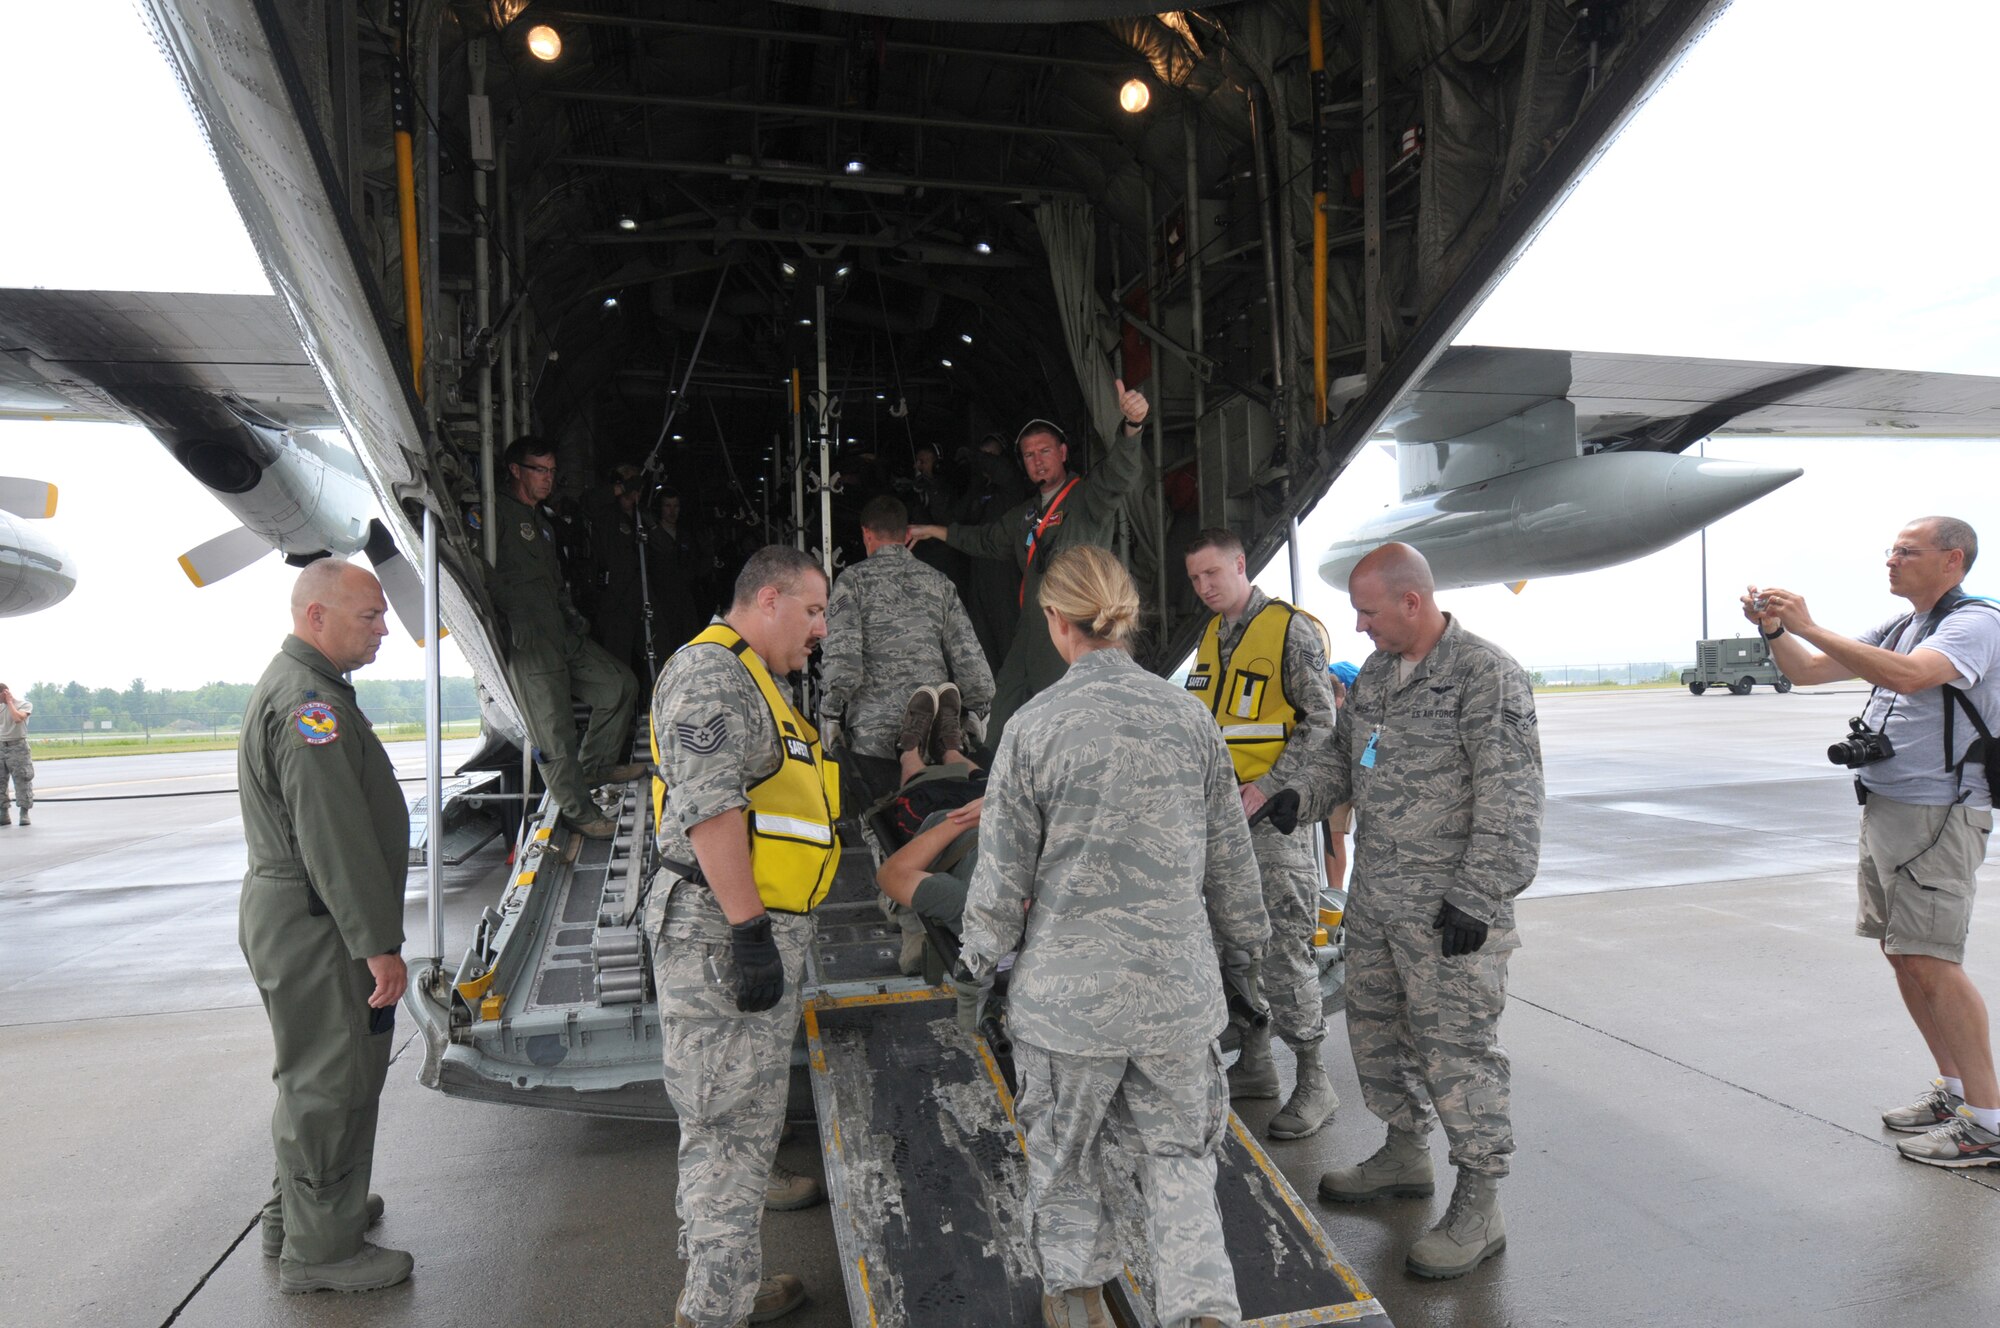 Members of the New York Air National Guard's 139th Aeromedical Evacuation Squadron, the Tennessee Air National Guard's 118th Medical Group, and the Albany Stratton Veterans Affairs Medical Center carry "patients", made up from the New York Civil Air Patrol, from the staging area tent to an LC-130 Hercules aircraft during an exercise at Stratton Air National Guard Base, Scotia, New York. The National Disaster Medical System Exercise, held July 27, 2015 through Aug. 2, 2015, demonstrated interagency partnership among the Department of Health and Human Services, the Department of Homeland Security, the Department of Defense, and the Department of Veterans Affairs and the instrumental role of aeromedical evacuation in the national emergency response and national defense frameworks. (U.S. Air National Guard photo by Master Sgt. William Gizara/Released)